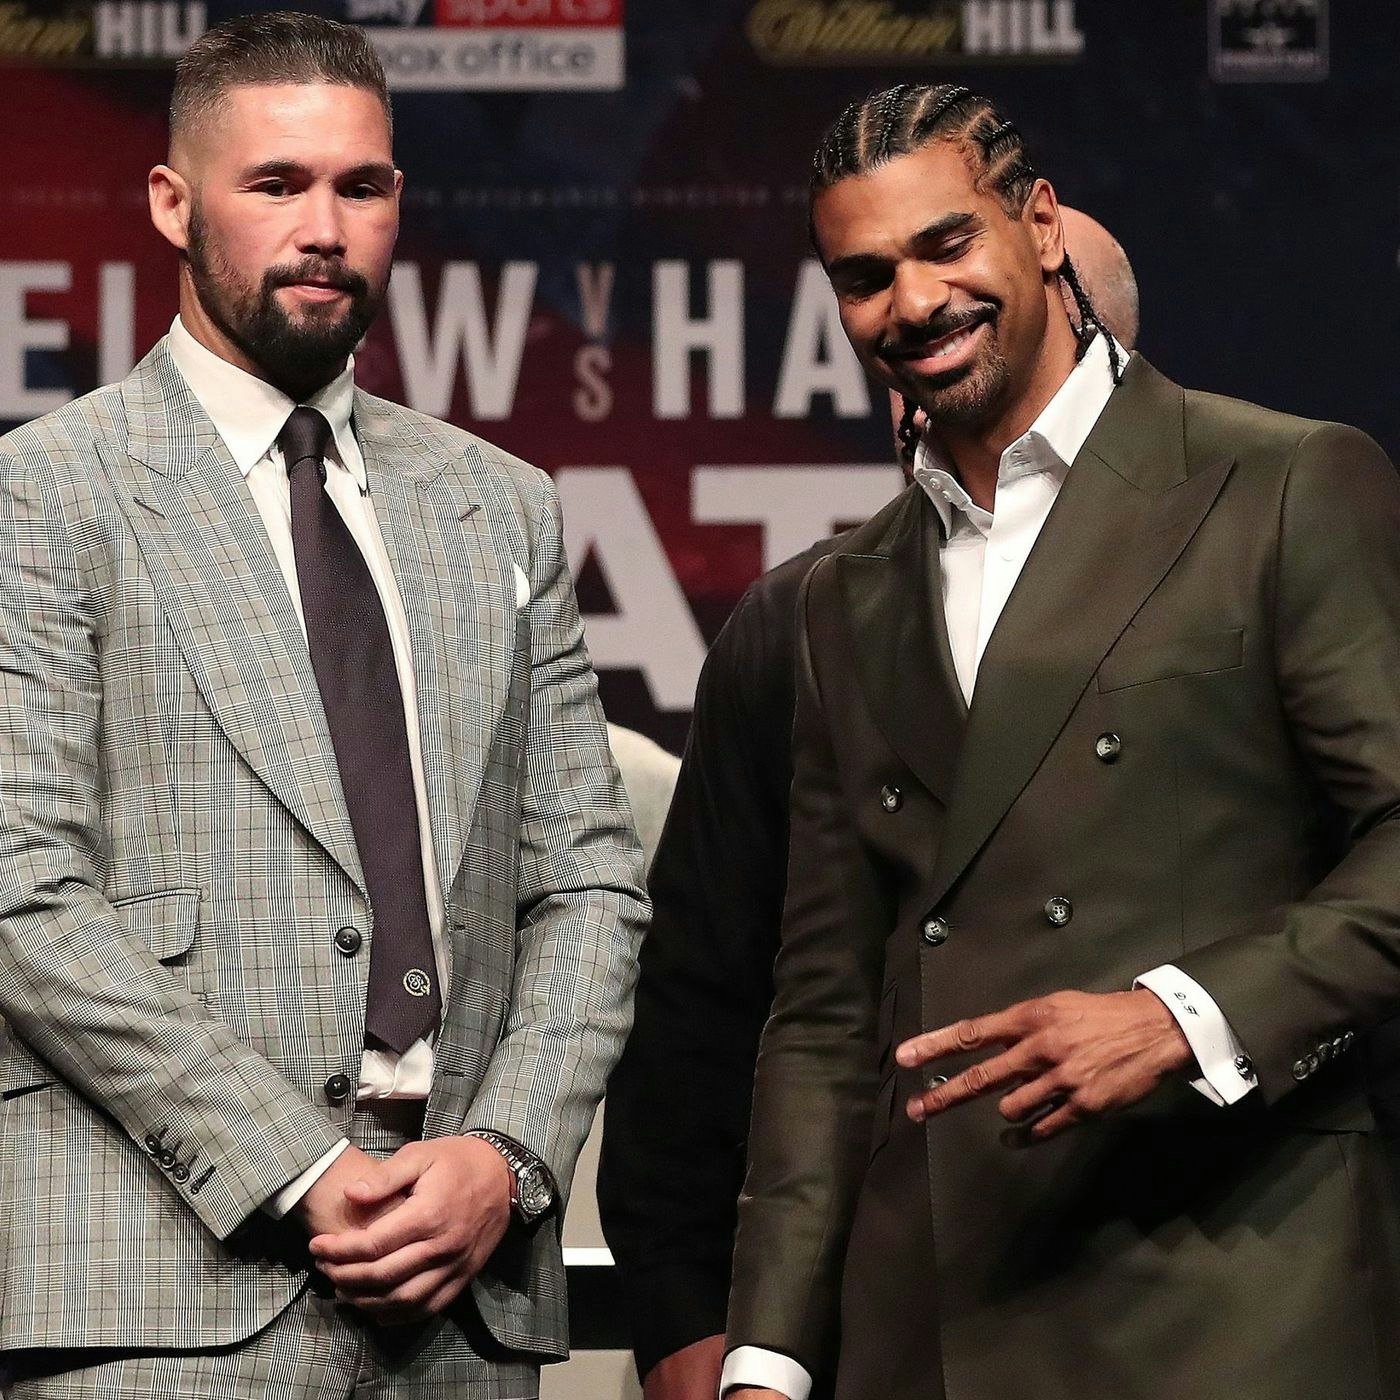 Round 23: David Haye faces make-or-break fight with Tony Bellew in heavyweight rematch